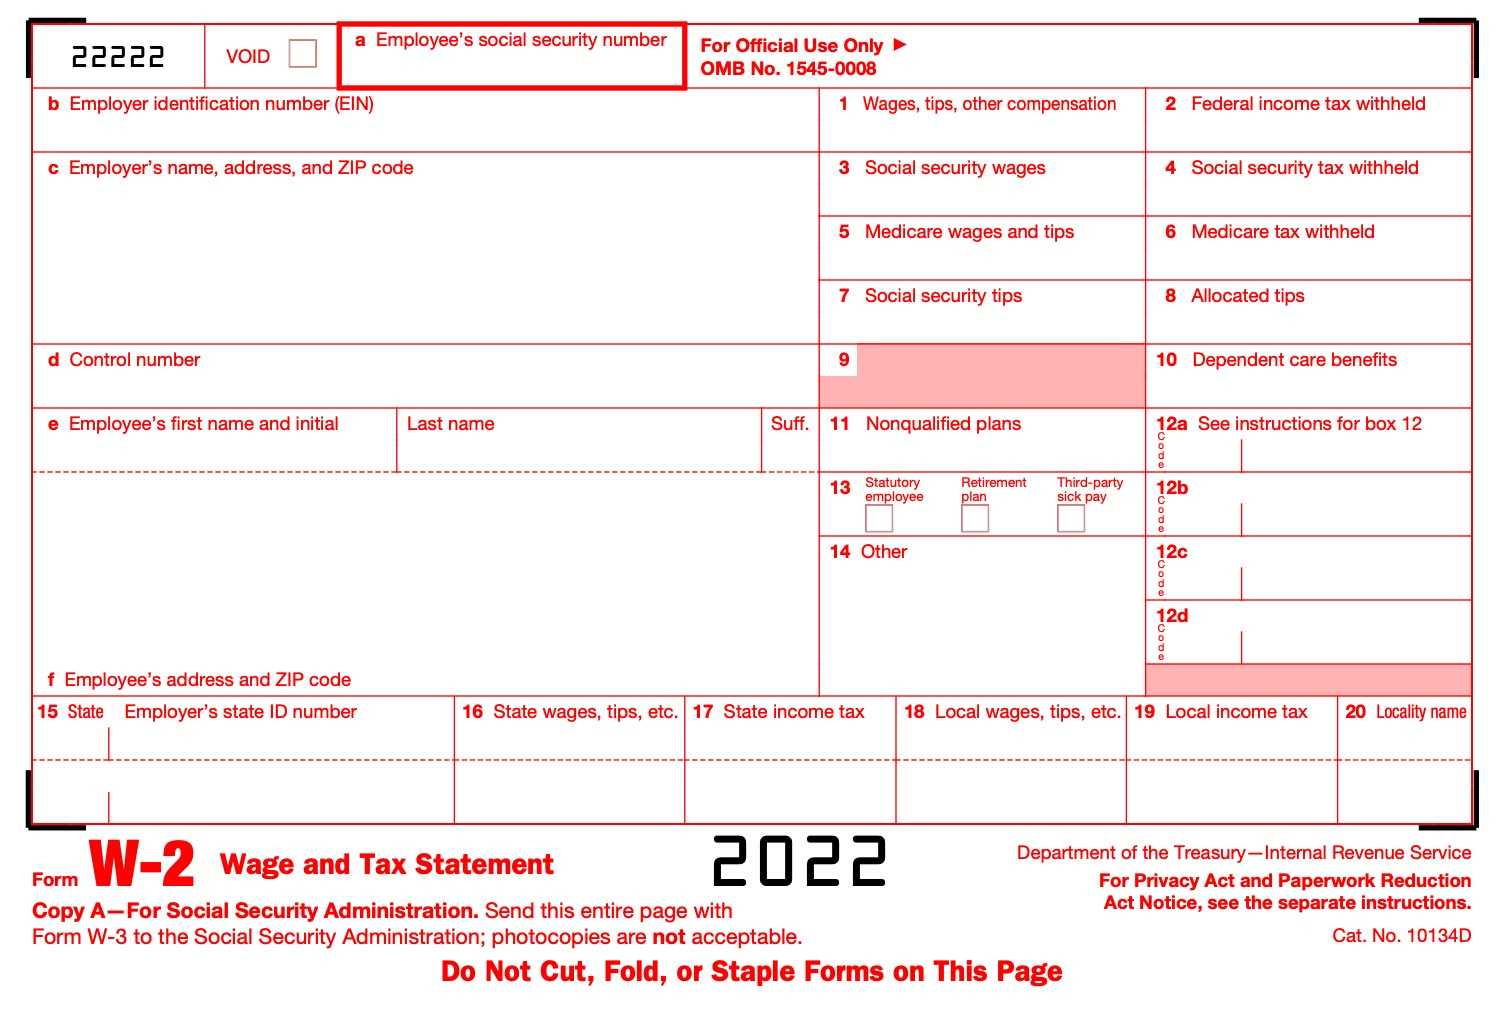 What Is Irs Form W-2? regarding How Do You Do W2 Forms